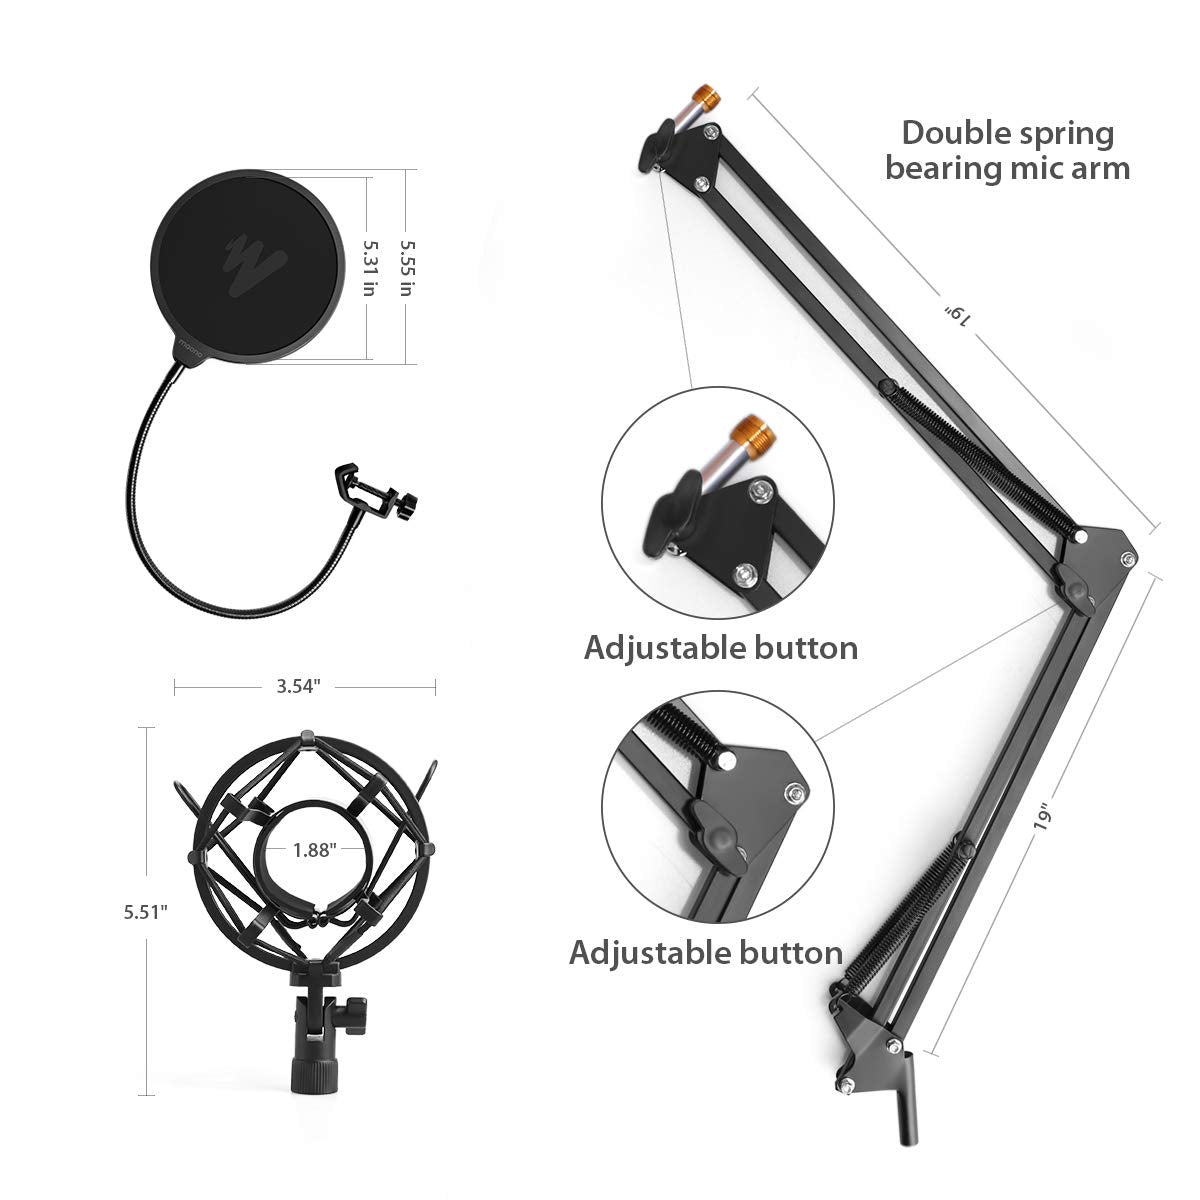 Maono AU-A03 Condenser Podcast Studio Microphone with Boom Arm Kit for Youtube Recording Vlog Livestream